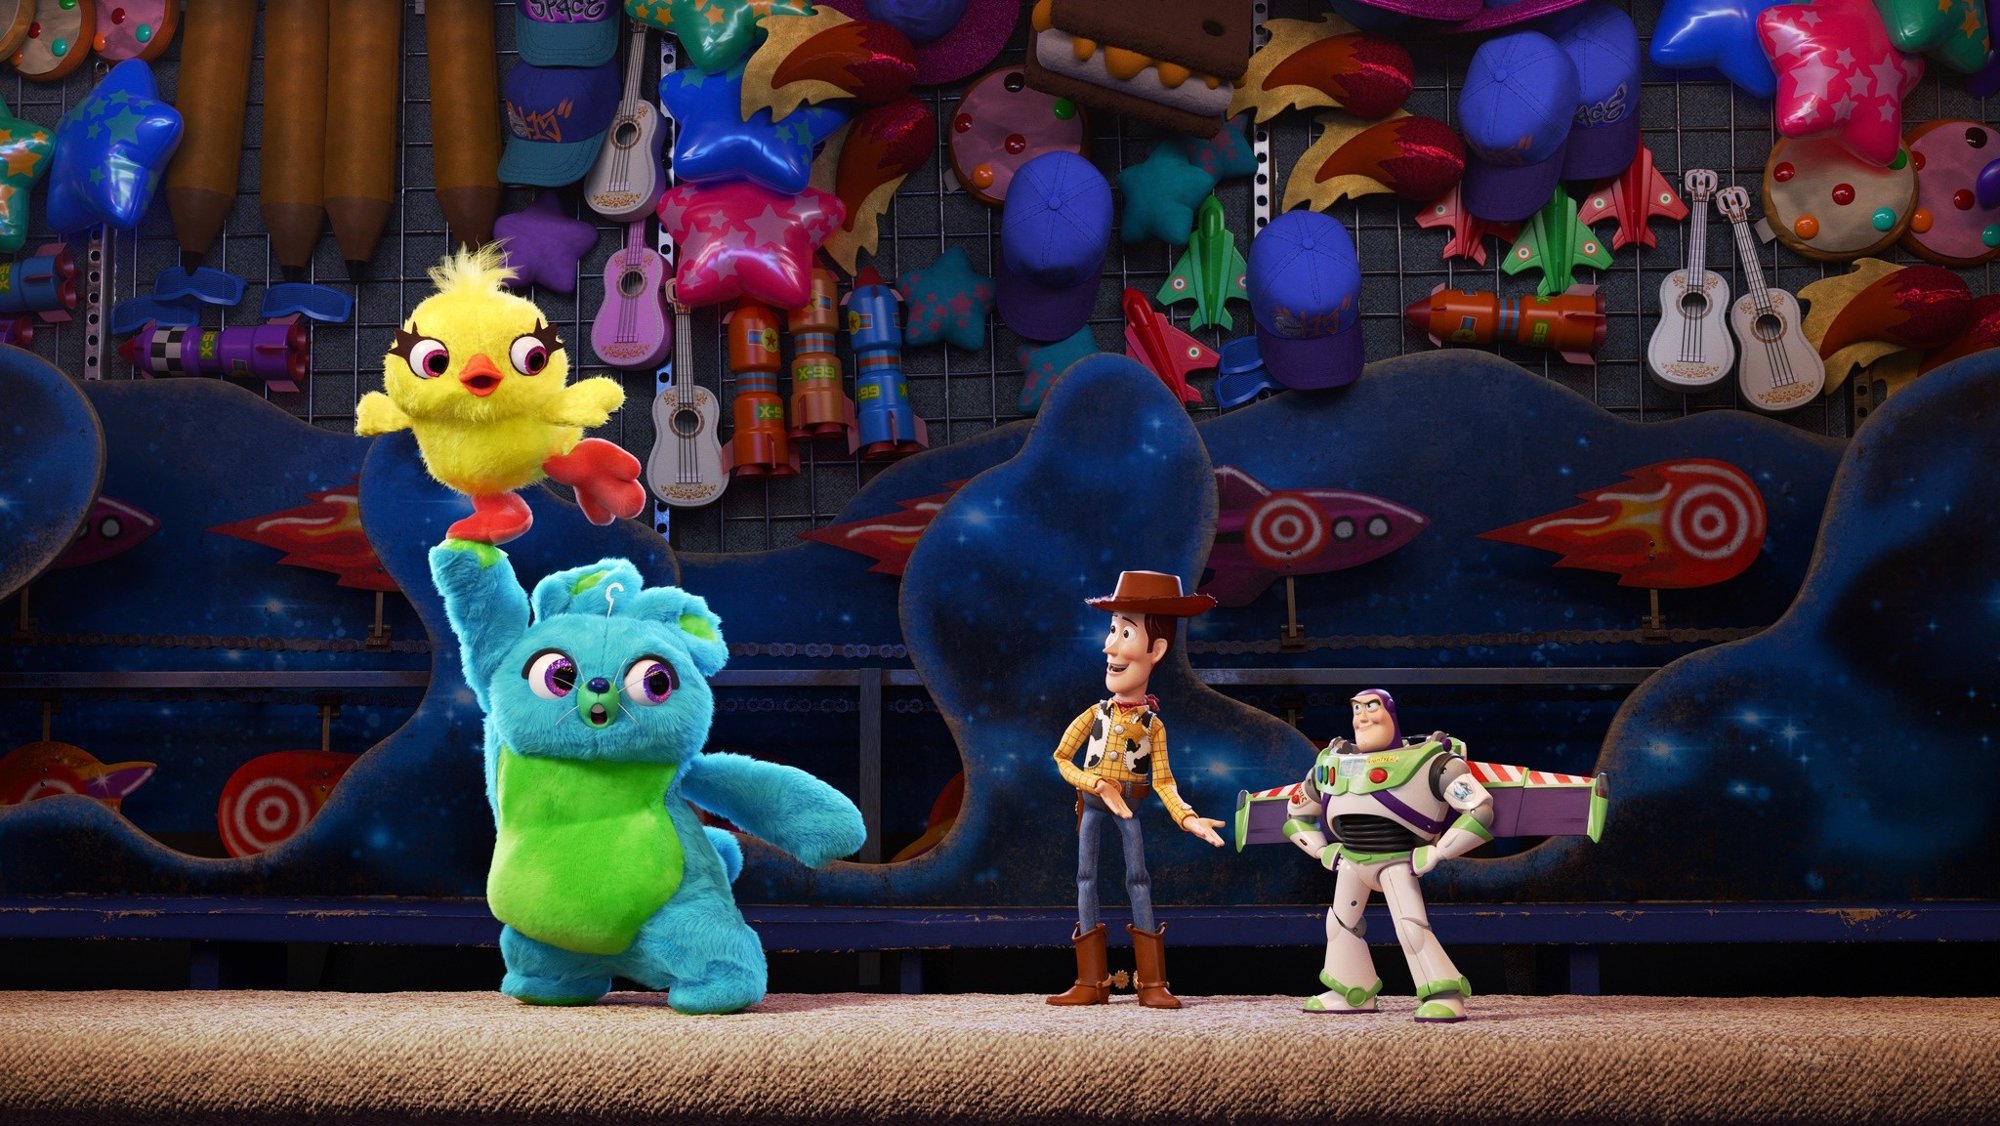 Ducky, Bunny, Woody and Buzz Lightyear from Pixar Animation Studios' Toy Story 4 (2019)